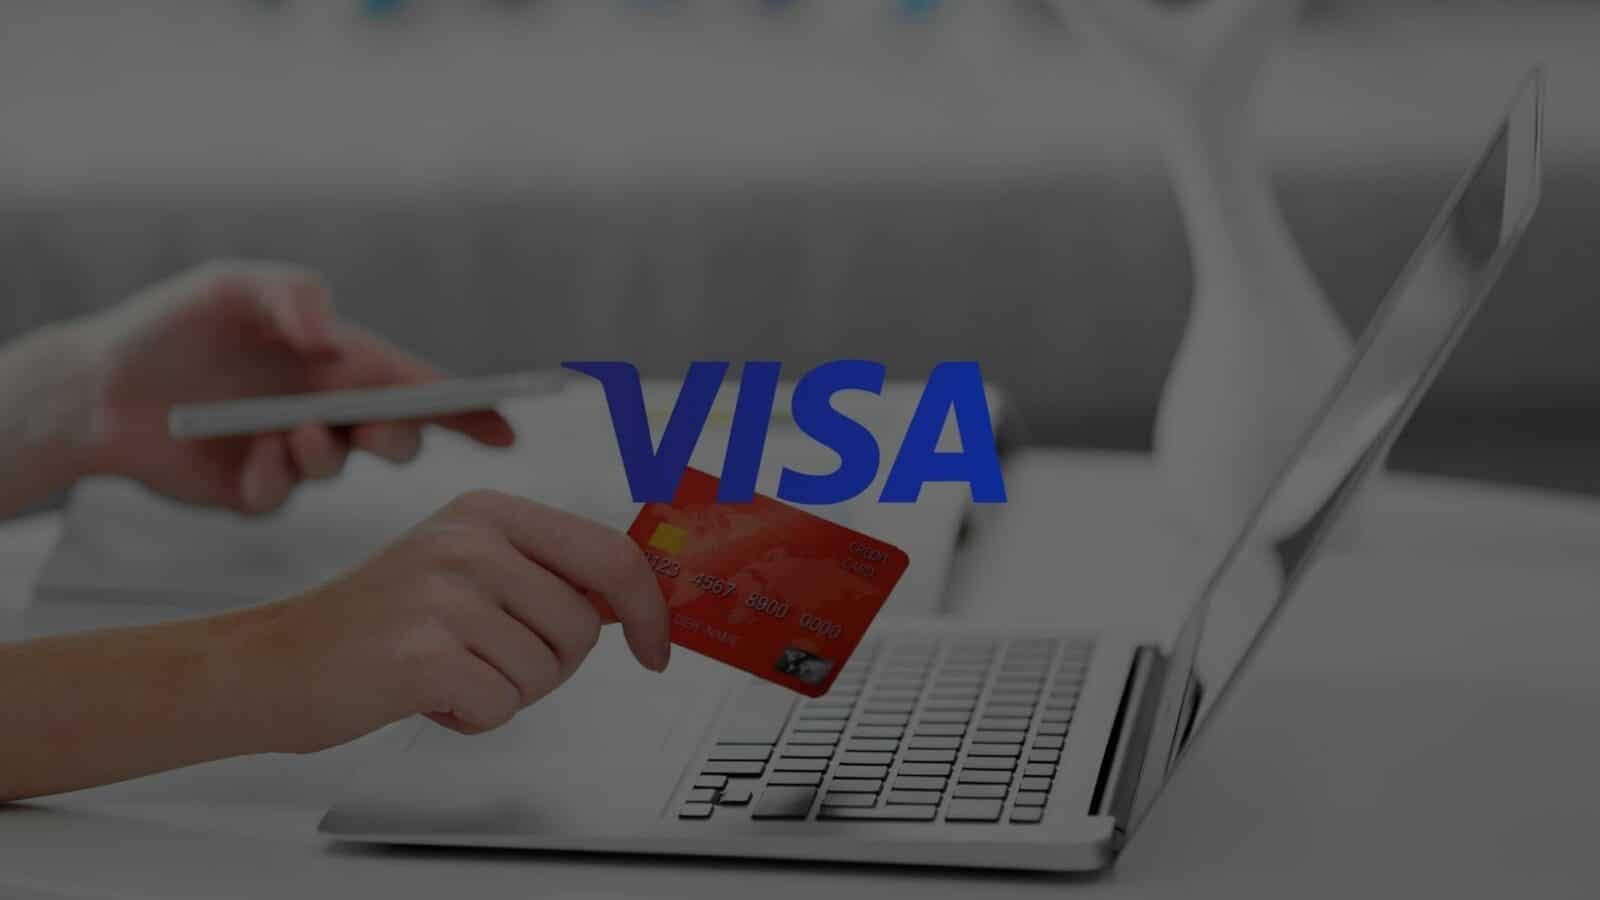 Visa Tests Payment of Crypto Gas Fees via Credit Card Visa, the global payments leader, has unveiled an experimental solution allowing users to pay on-chain gas fees directly through their Visa cards. This initiative is a response to the challenges many face in maintaining adequate Ether (ETH) balances in their cryptocurrency wallets specifically for gas fees.